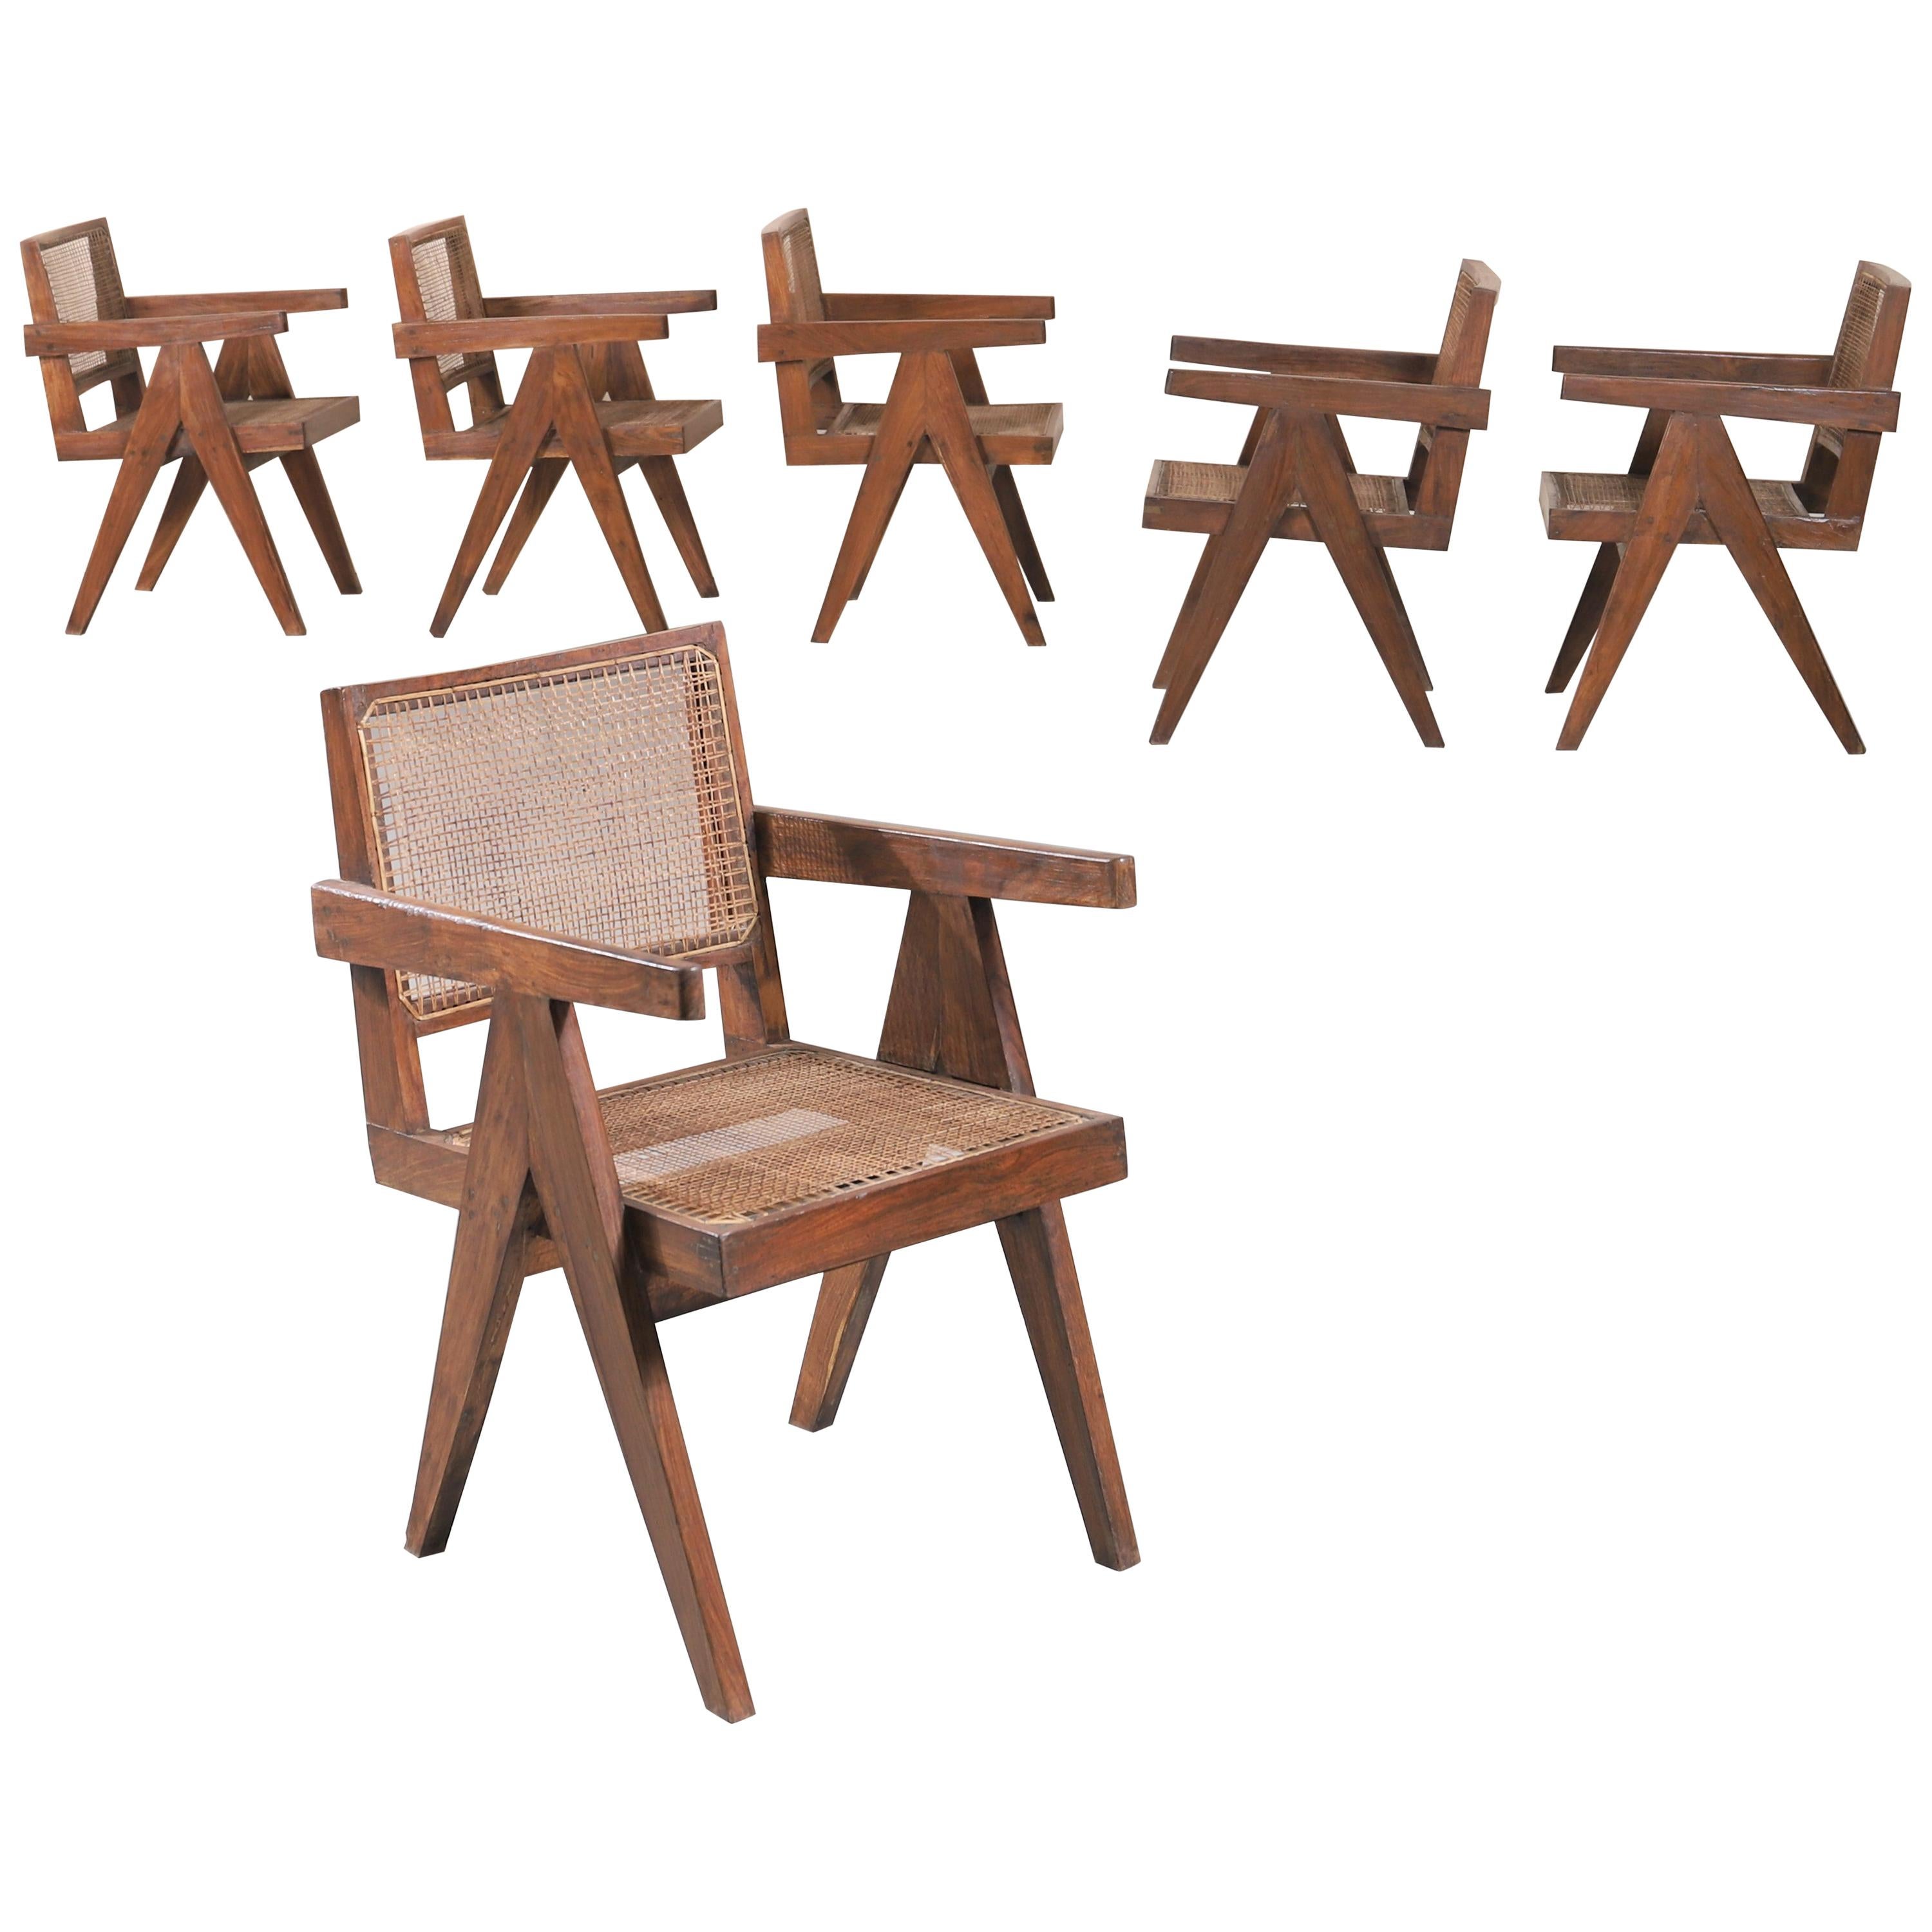 Set of Six "Office Cane Chairs" circa 1955 by Pierre Jeanneret